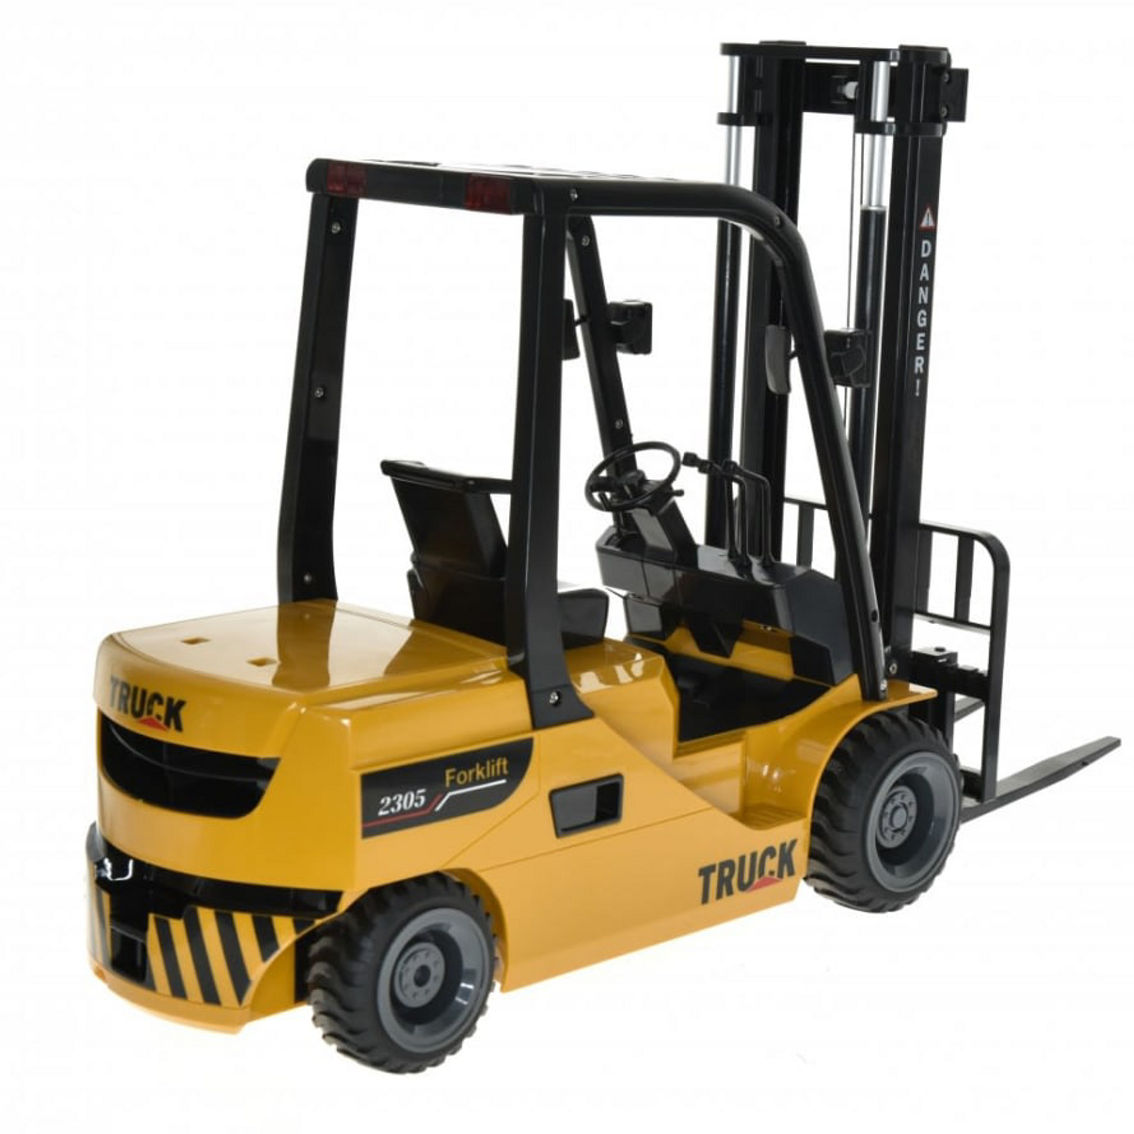 CIS-2305 1:14 scale fork lift with lights sound 2.4 GHz rechargeable batteries - Image 5 of 5